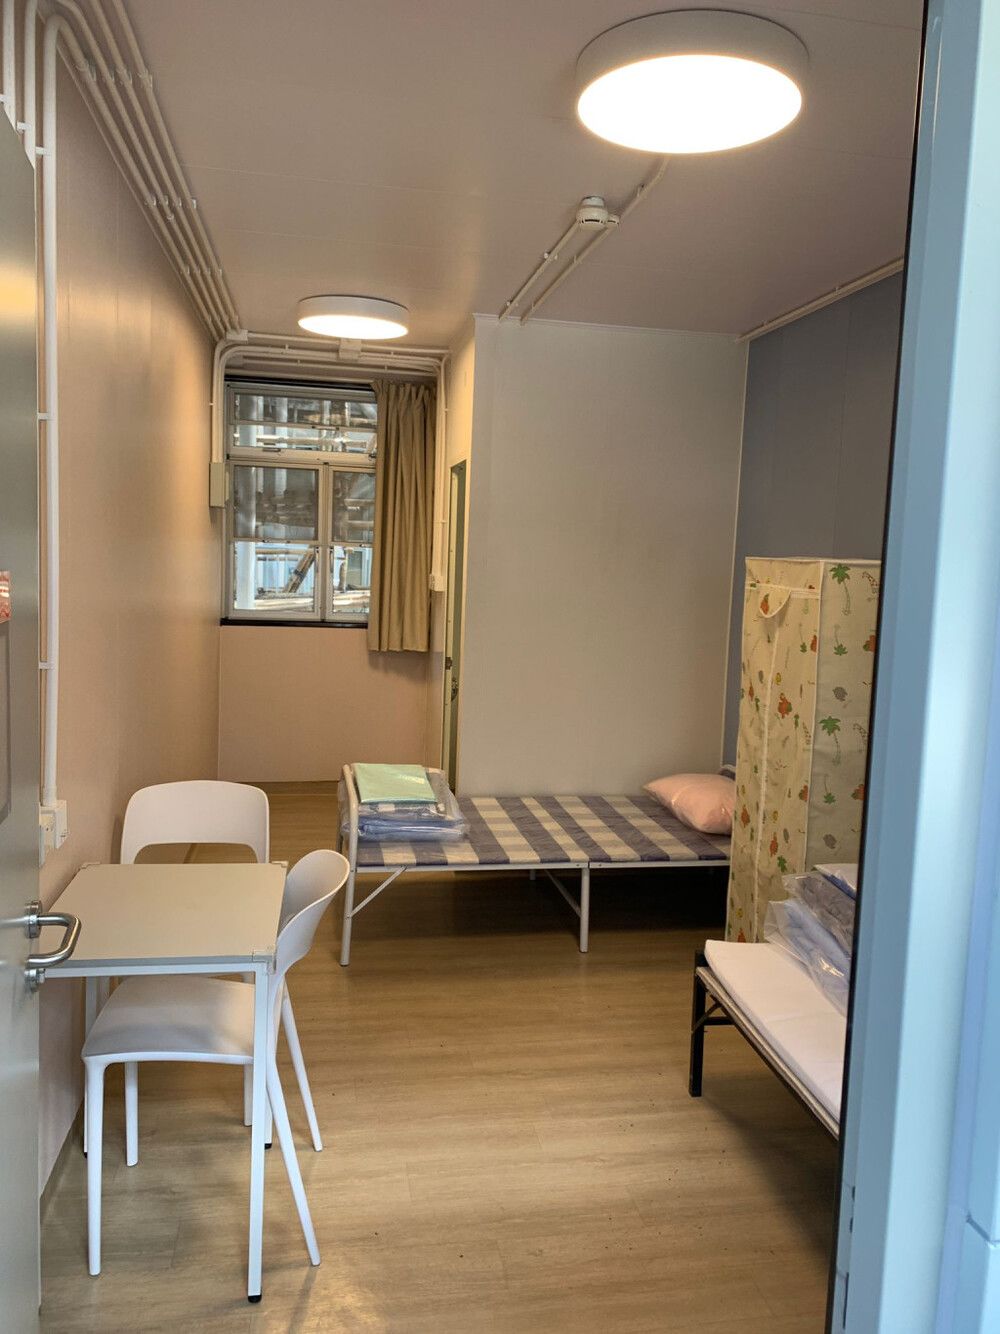 HK’s makeshift Covid hospitals may be converted into transitional homes